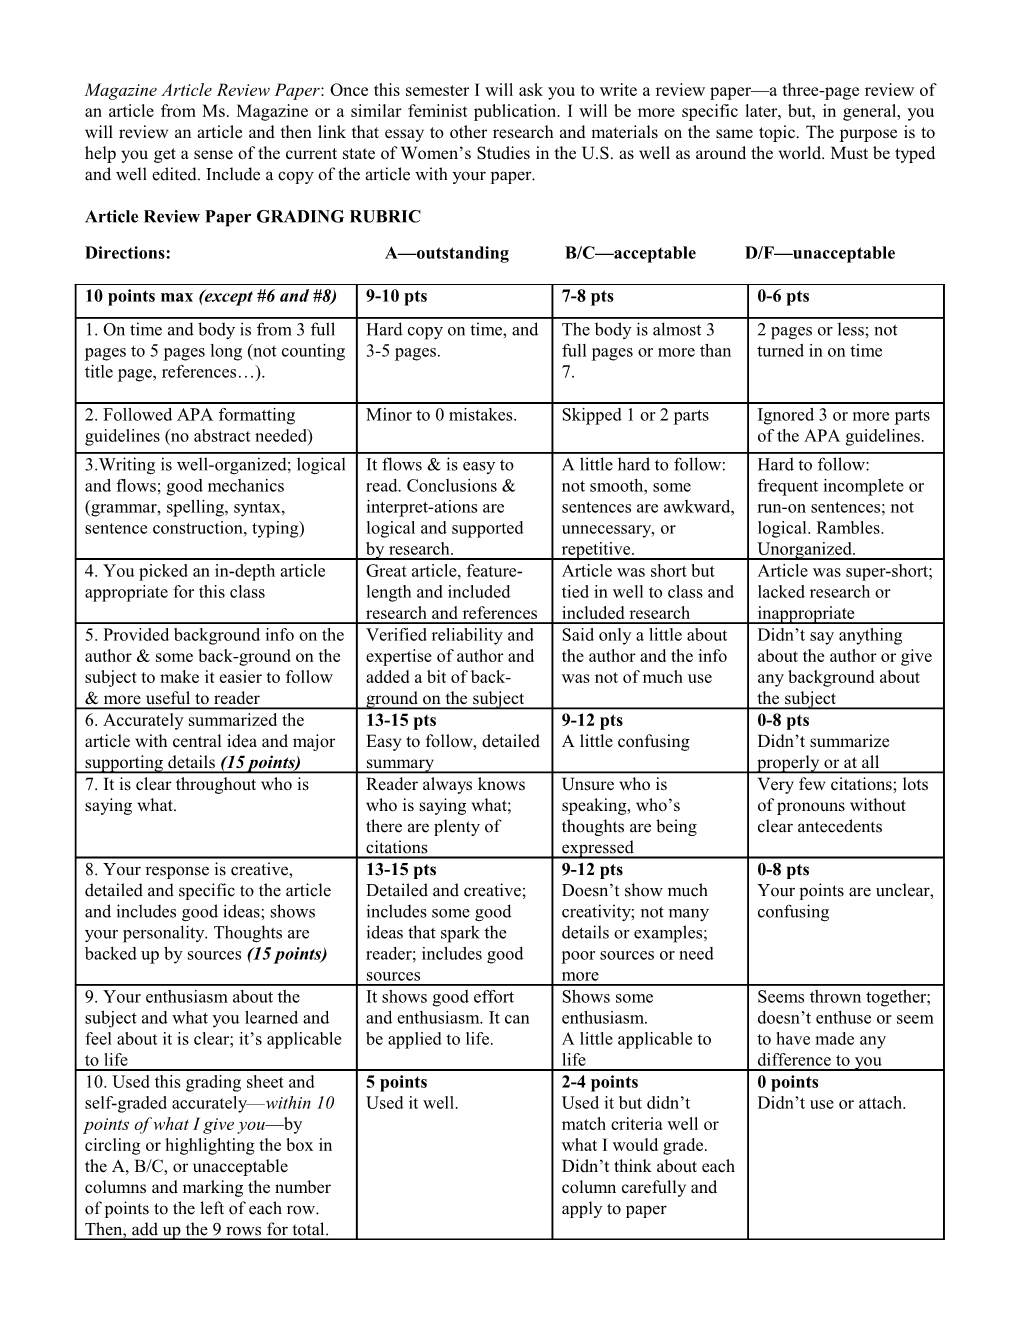 Article Review Paper GRADING RUBRIC